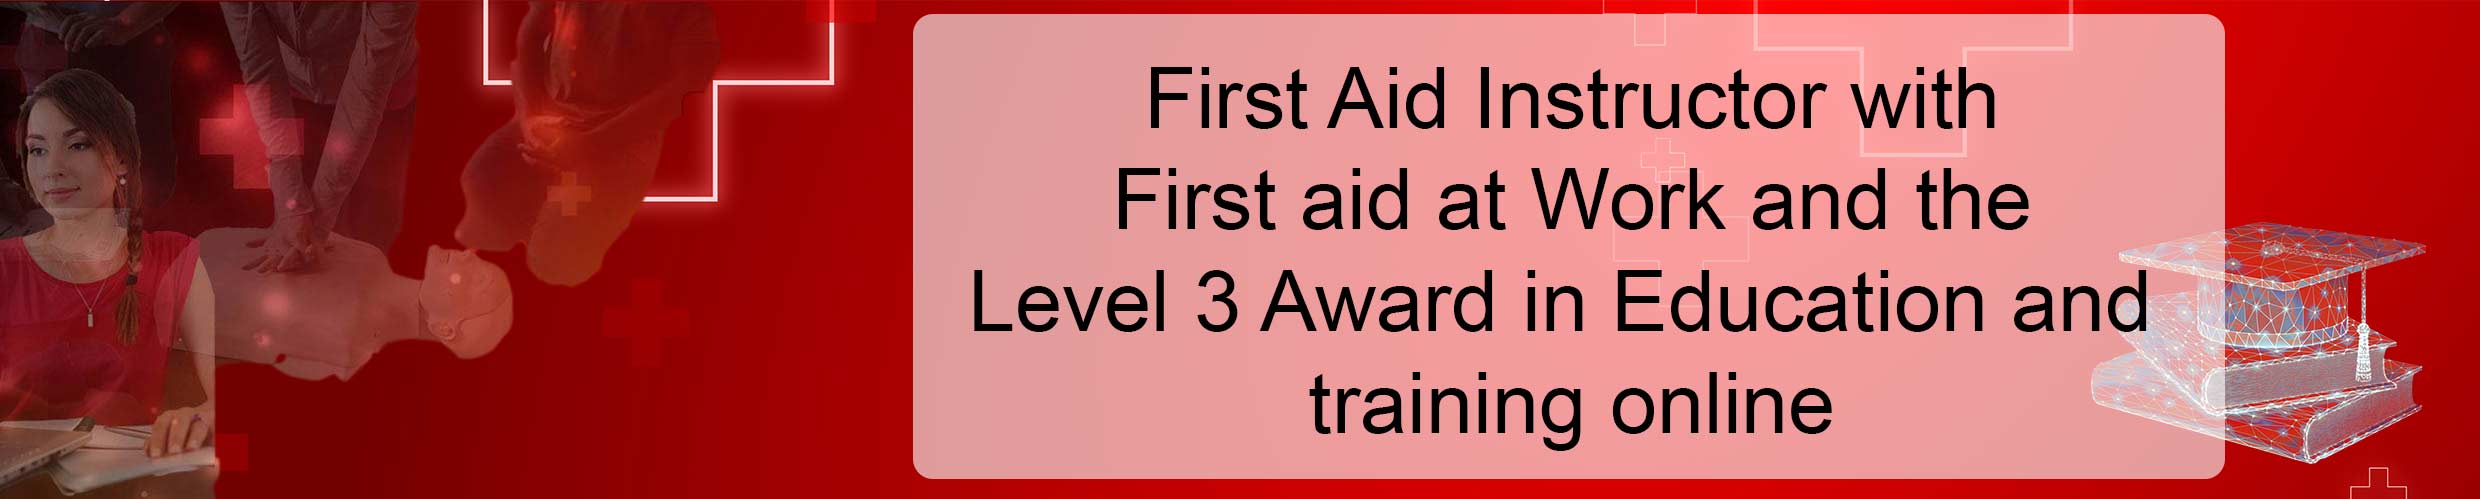 first aid instructor with aet